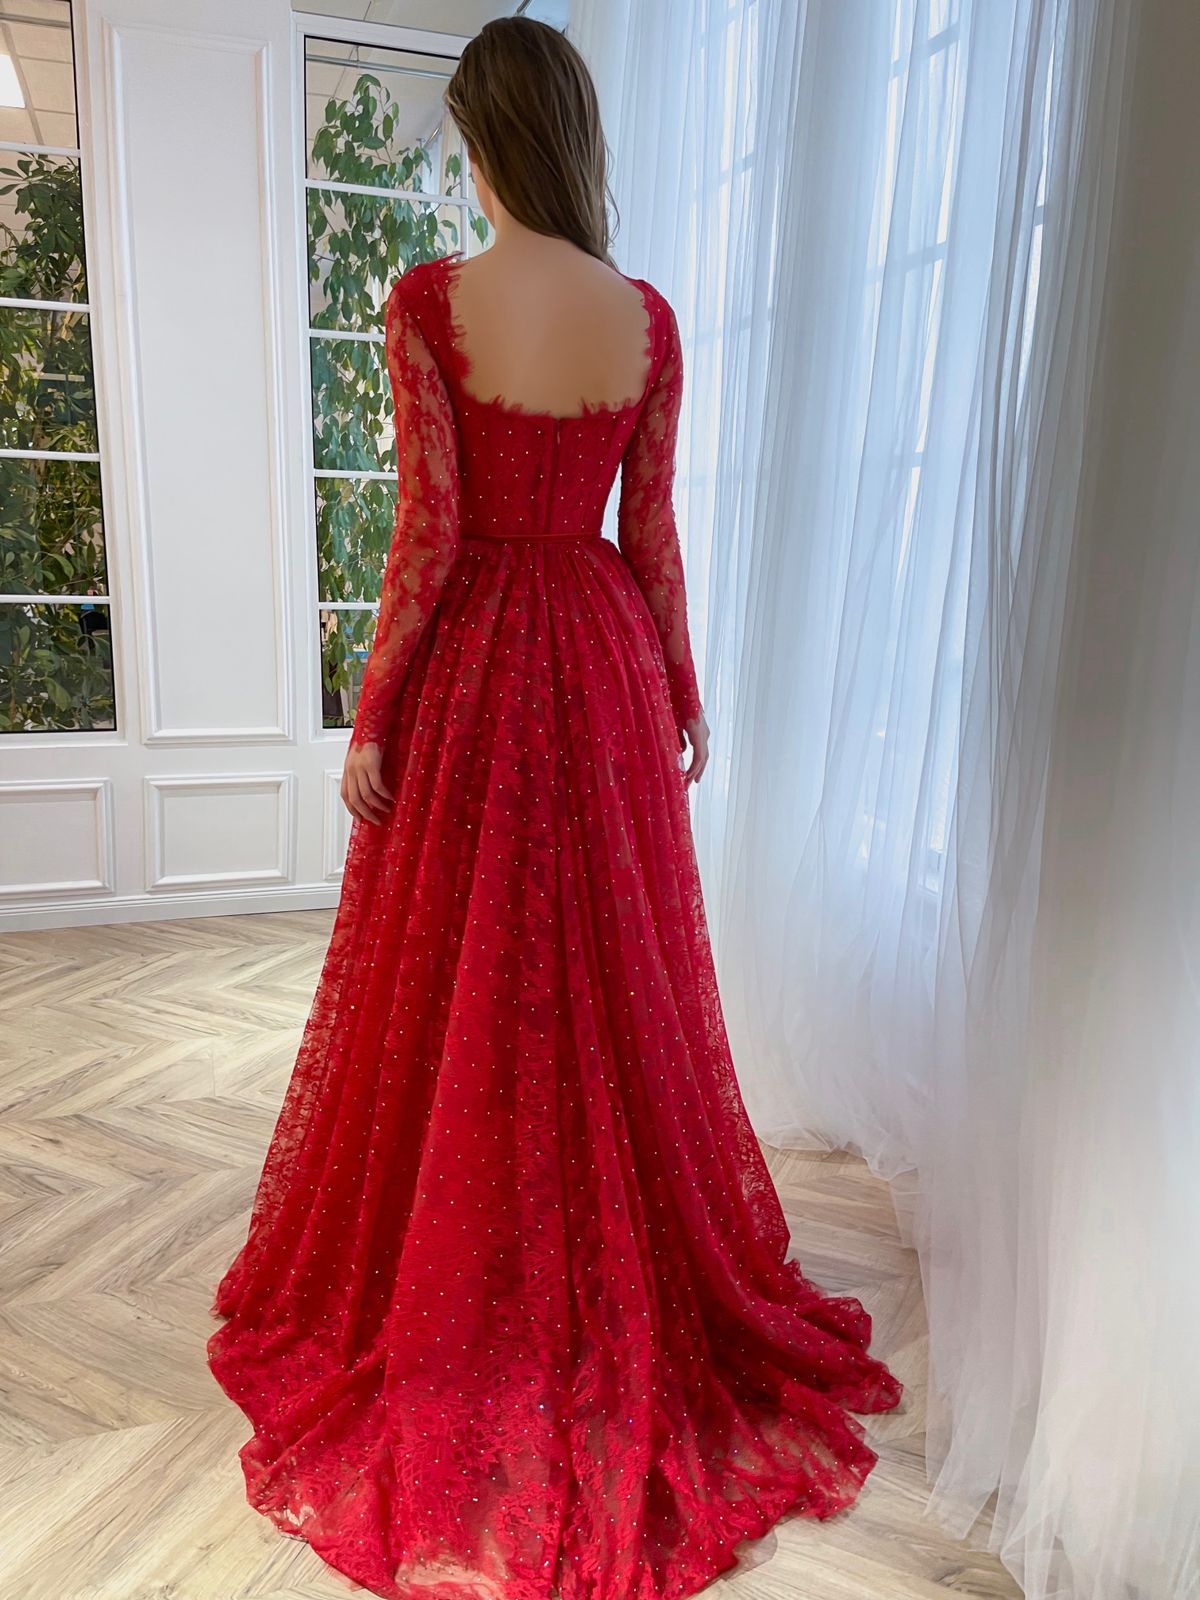 Red/Black Lace & Satin Sheer Long Sleeve Prom Dress - Promfy